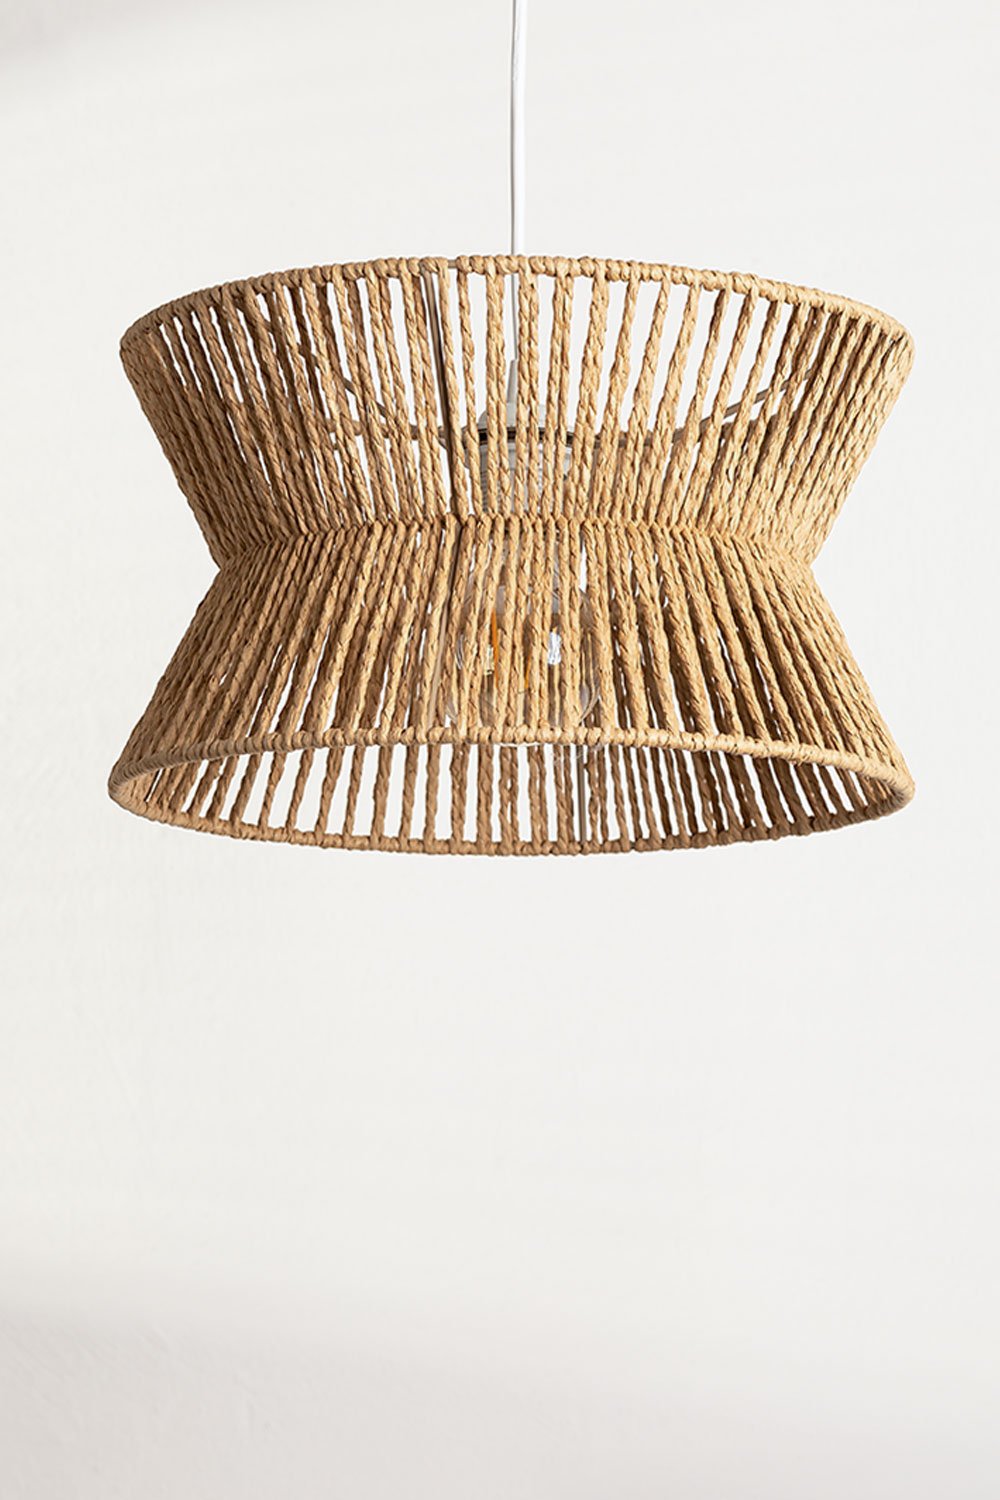 Braided Paper Ceiling Lamp Bonny , gallery image 2